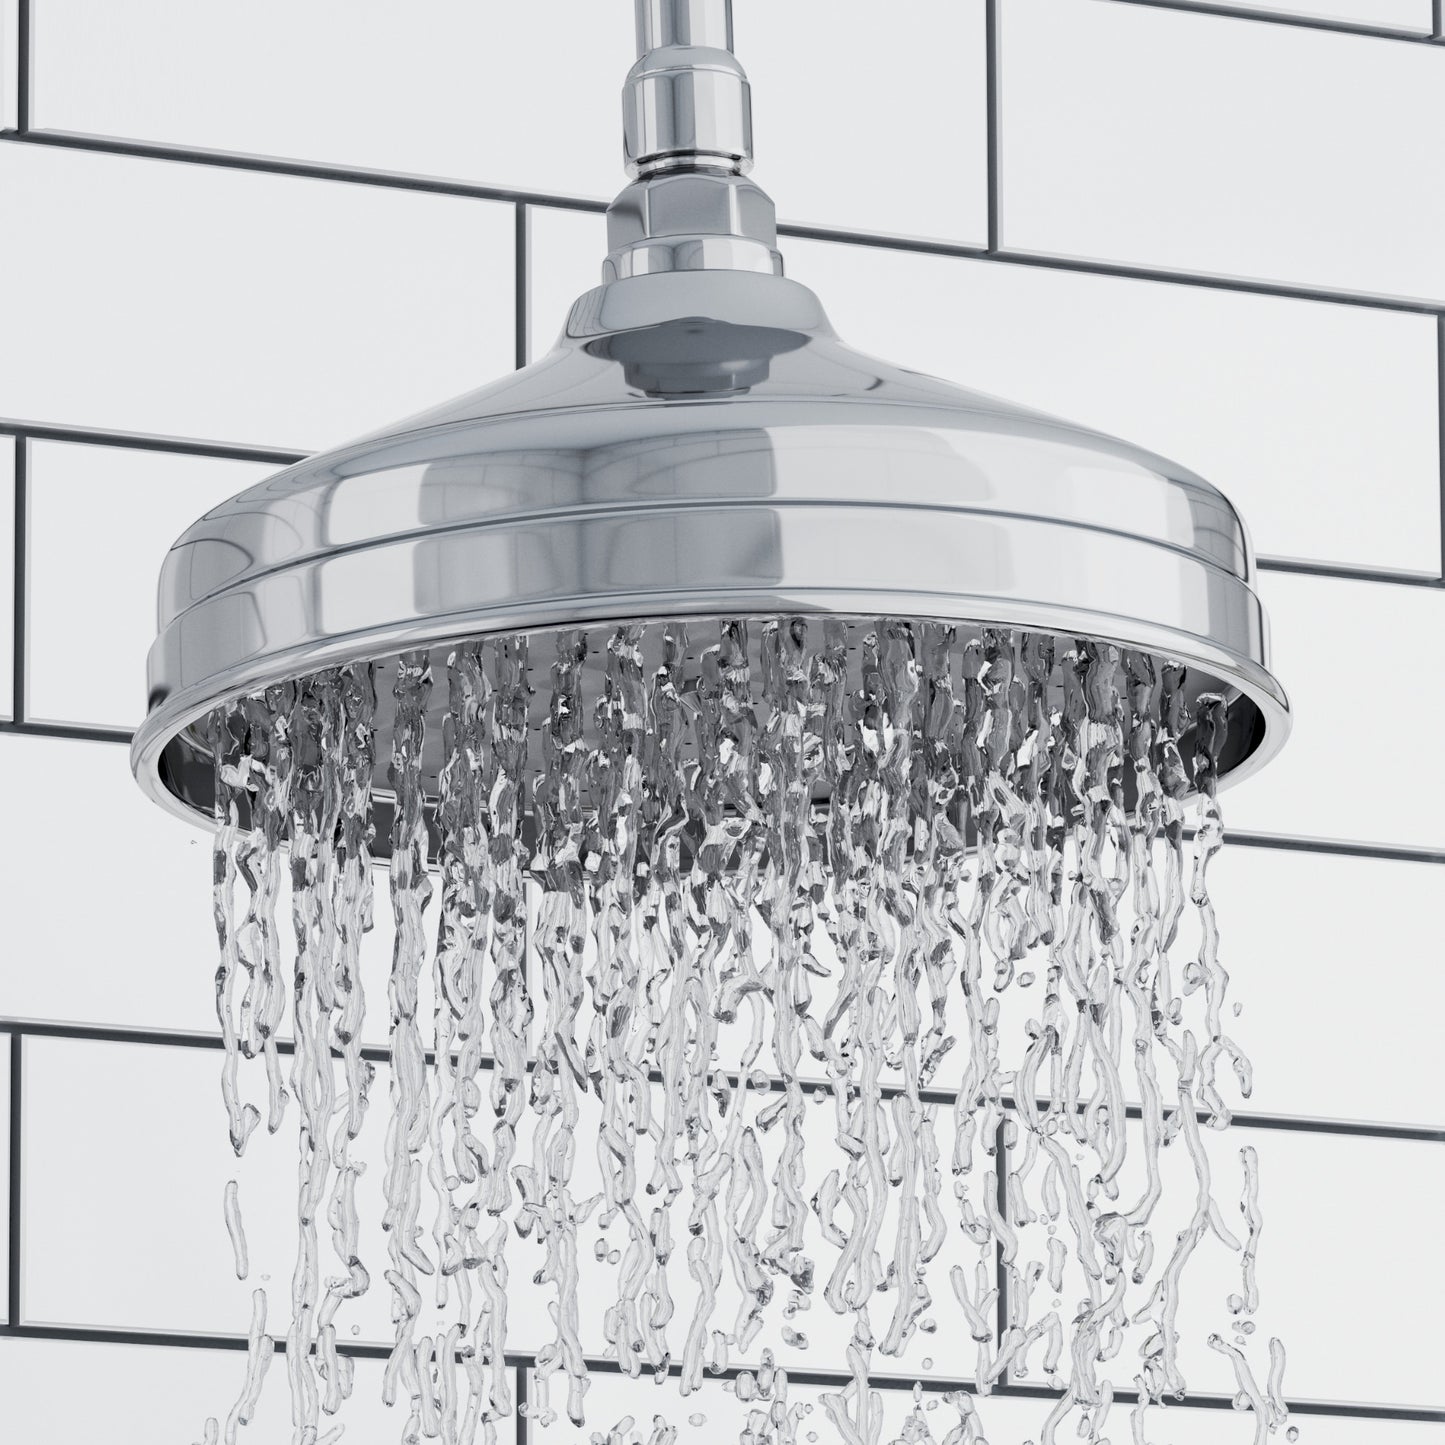 Traditional Wall Fixed Apron Brass Shower Head 8" With Shower Arm - Chrome